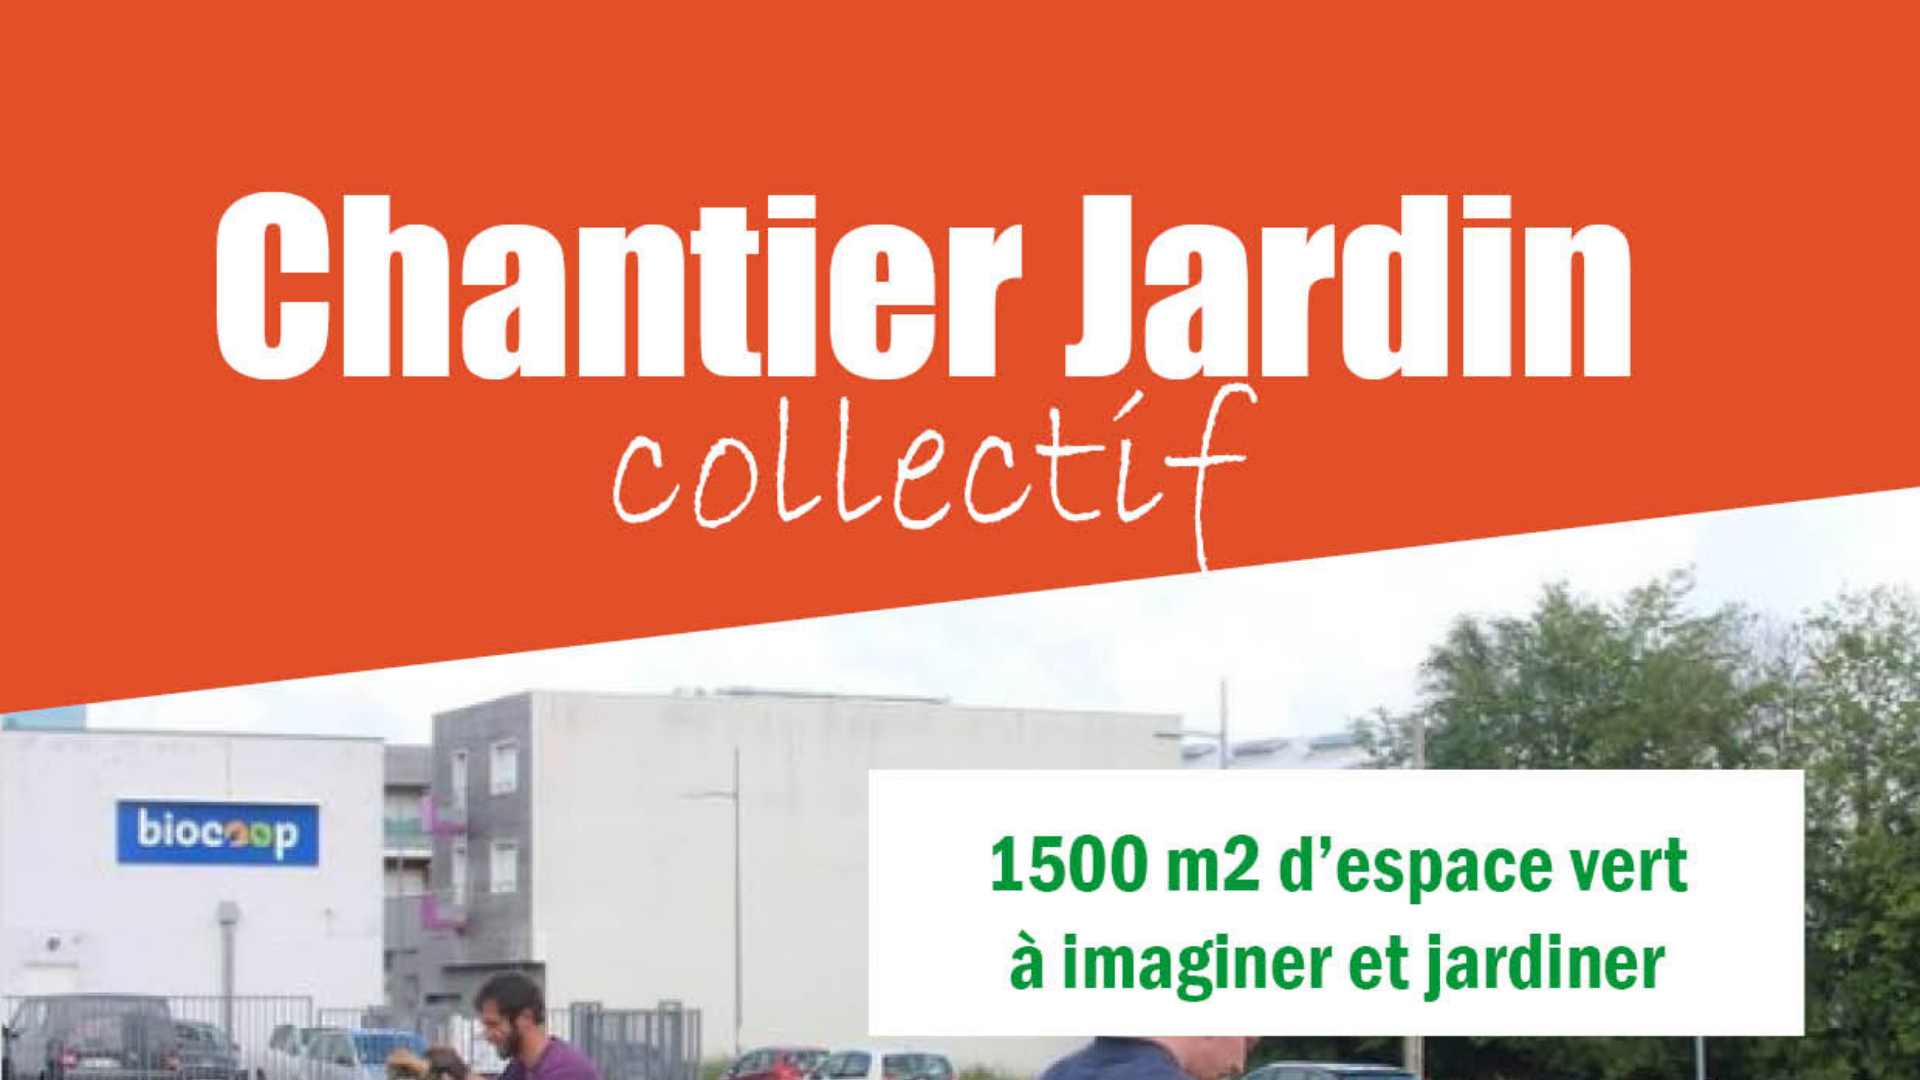 You are currently viewing Chantier jardin collectif : les dates d’avril à juin 2022